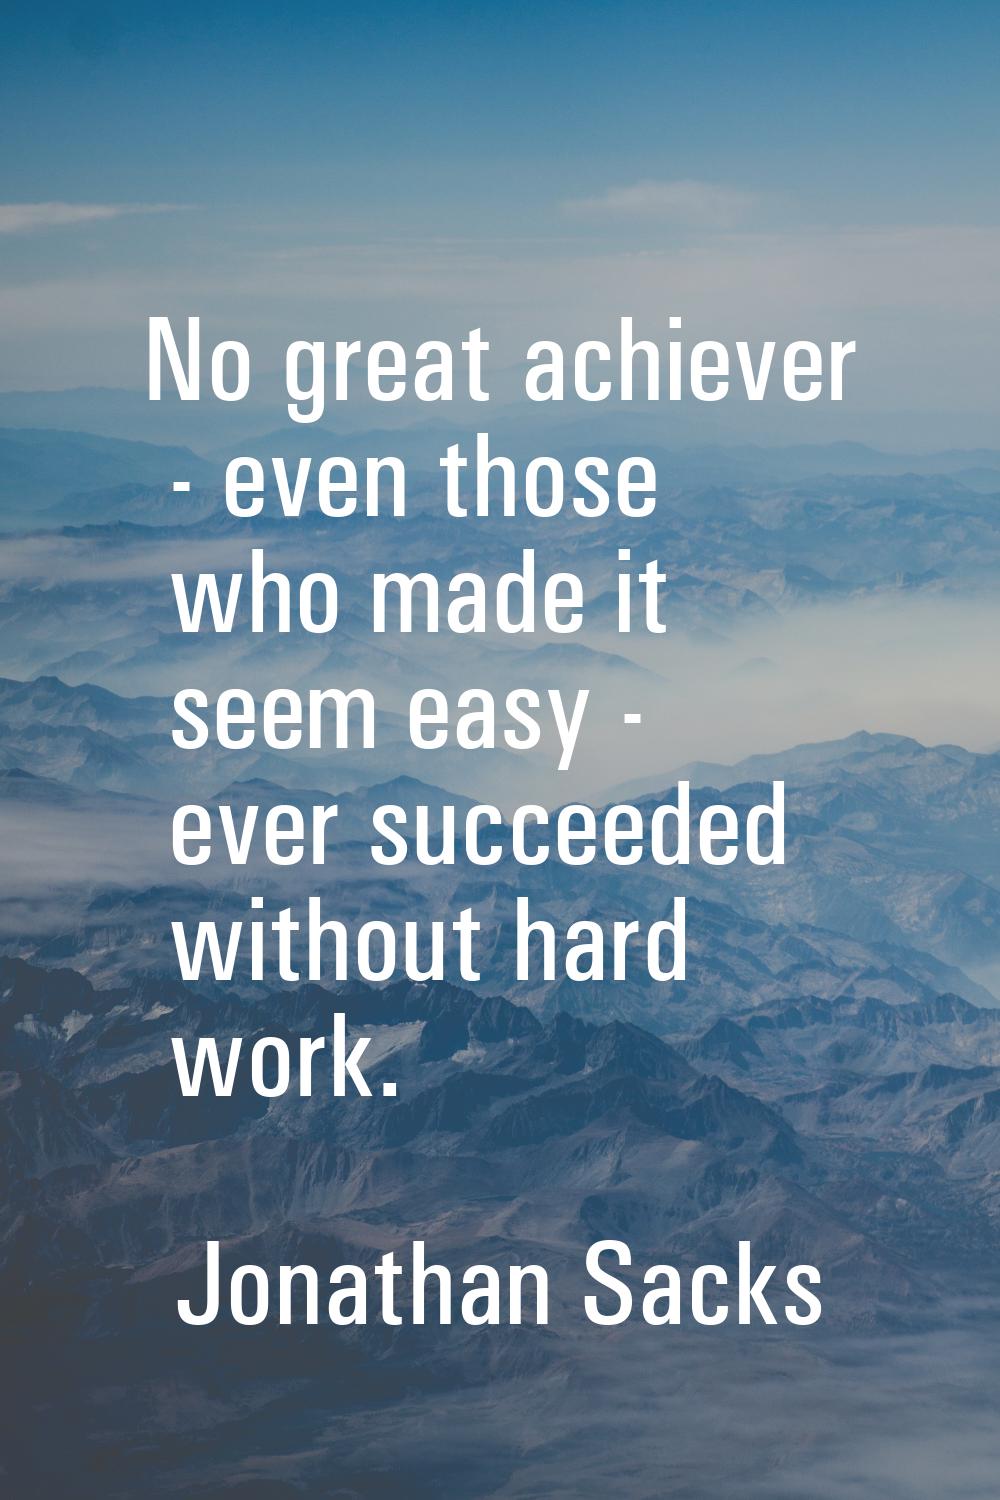 No great achiever - even those who made it seem easy - ever succeeded without hard work.